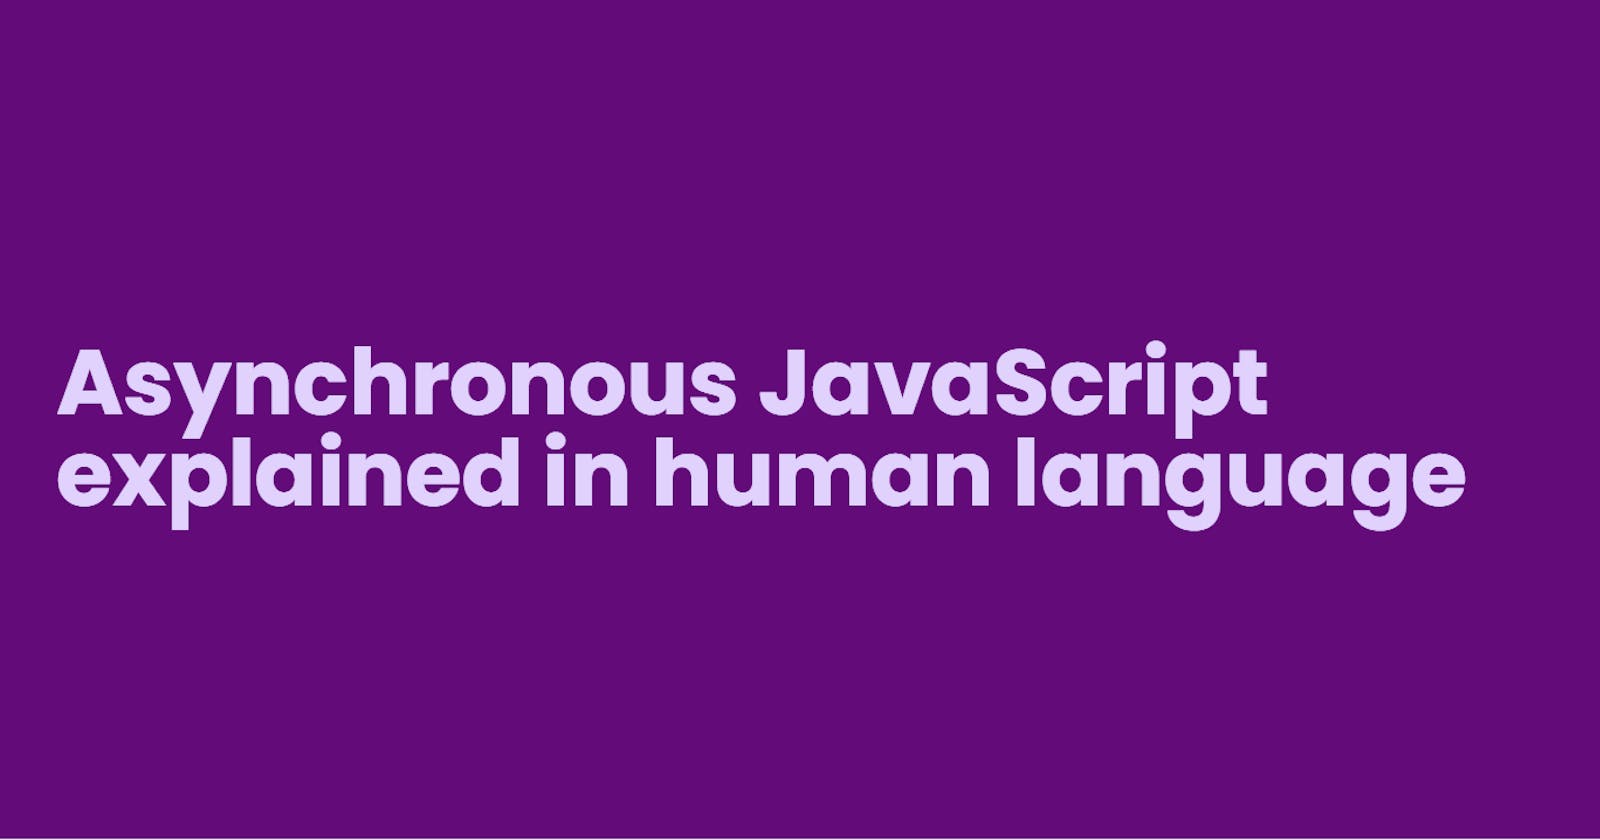 Asynchronous JavaScript 
explained in human language